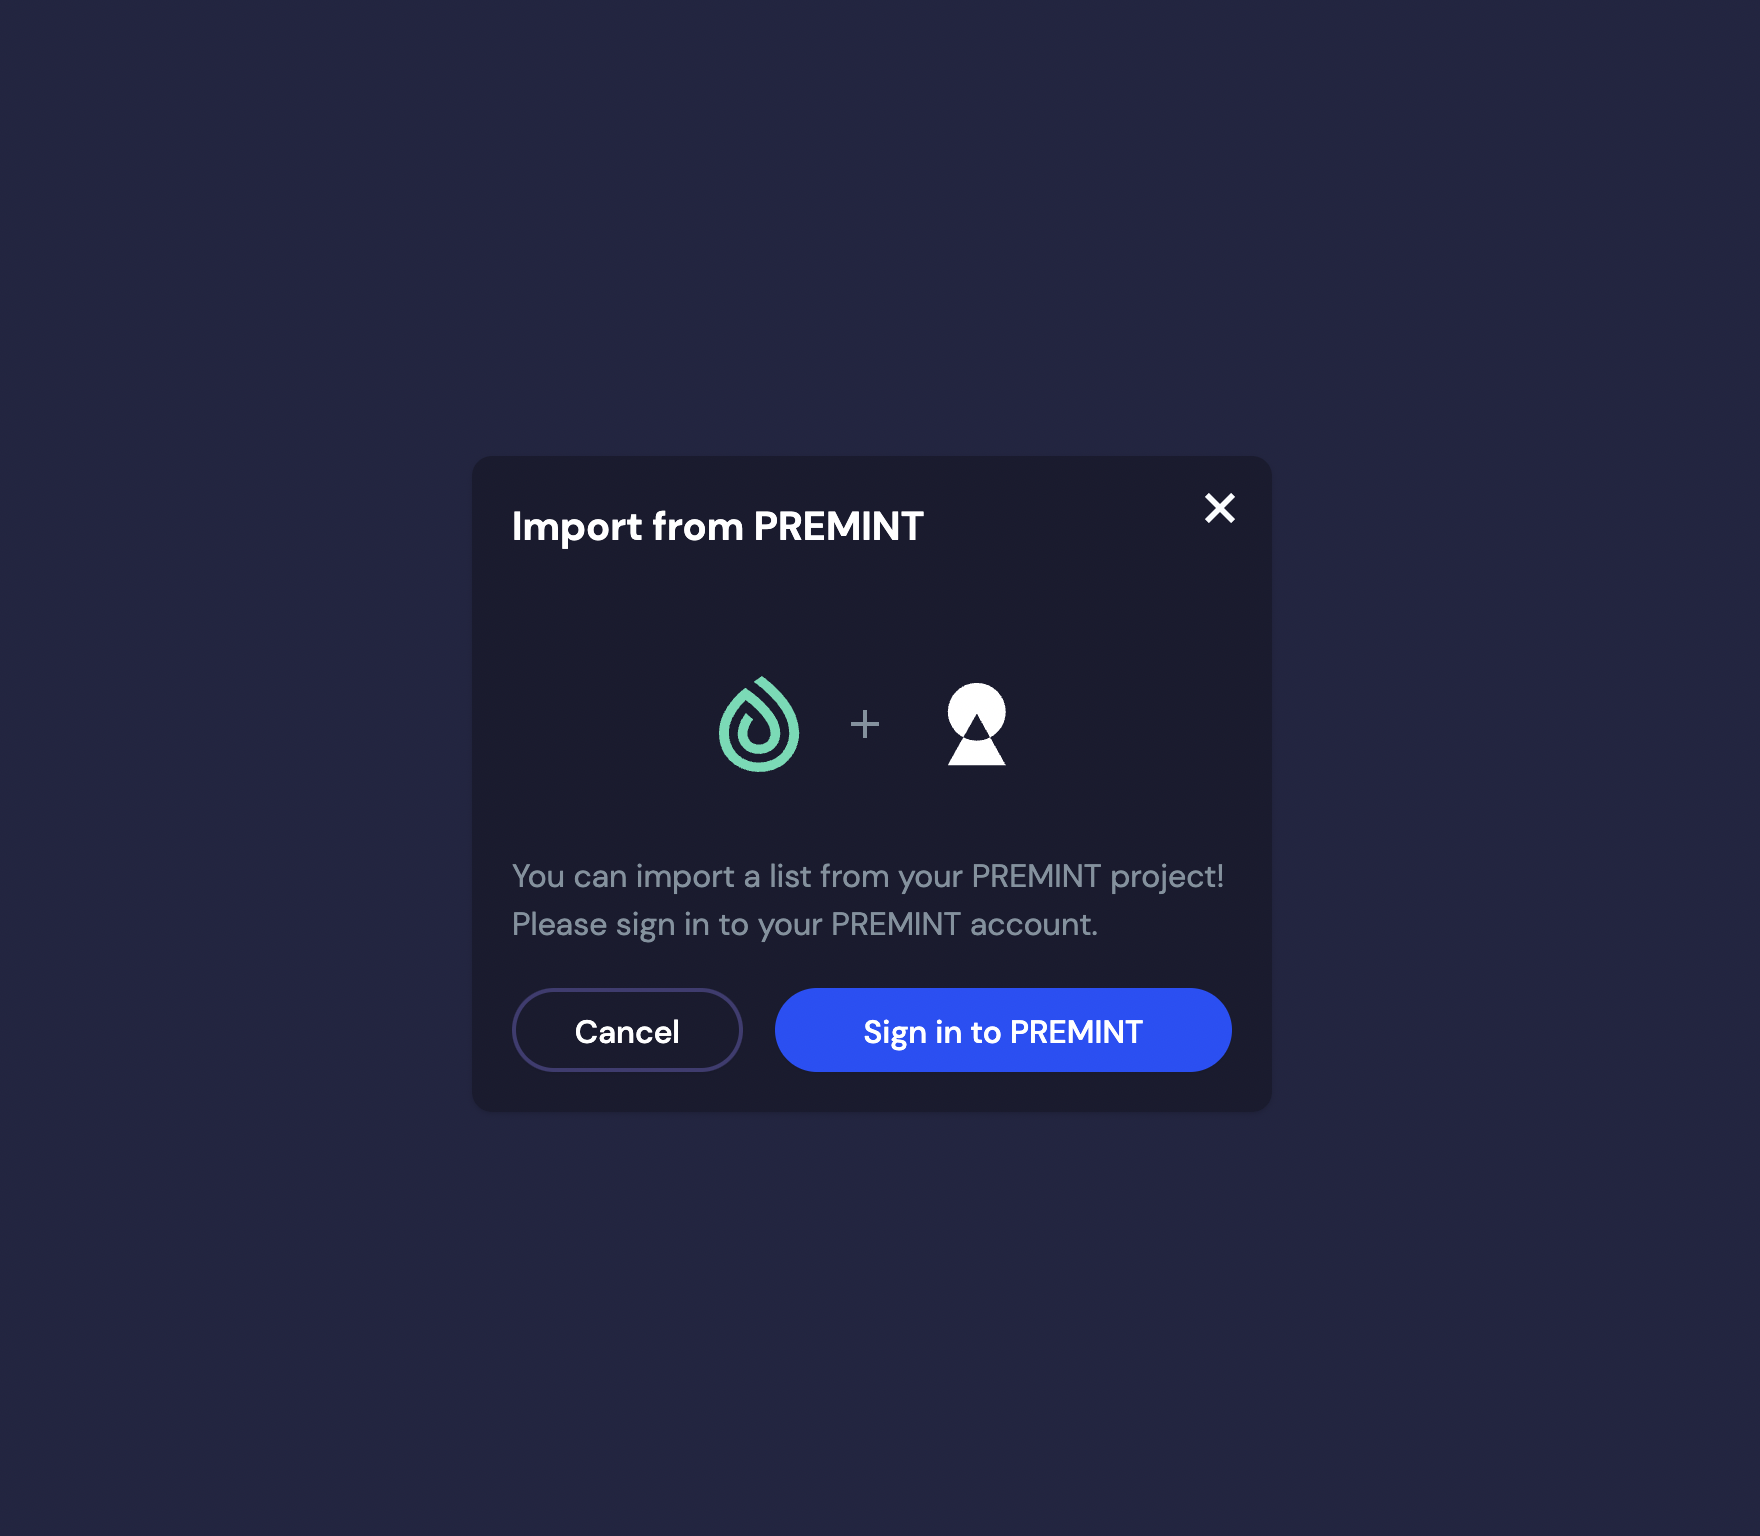 MintDrop screenshot of button to sign in to PREMINT